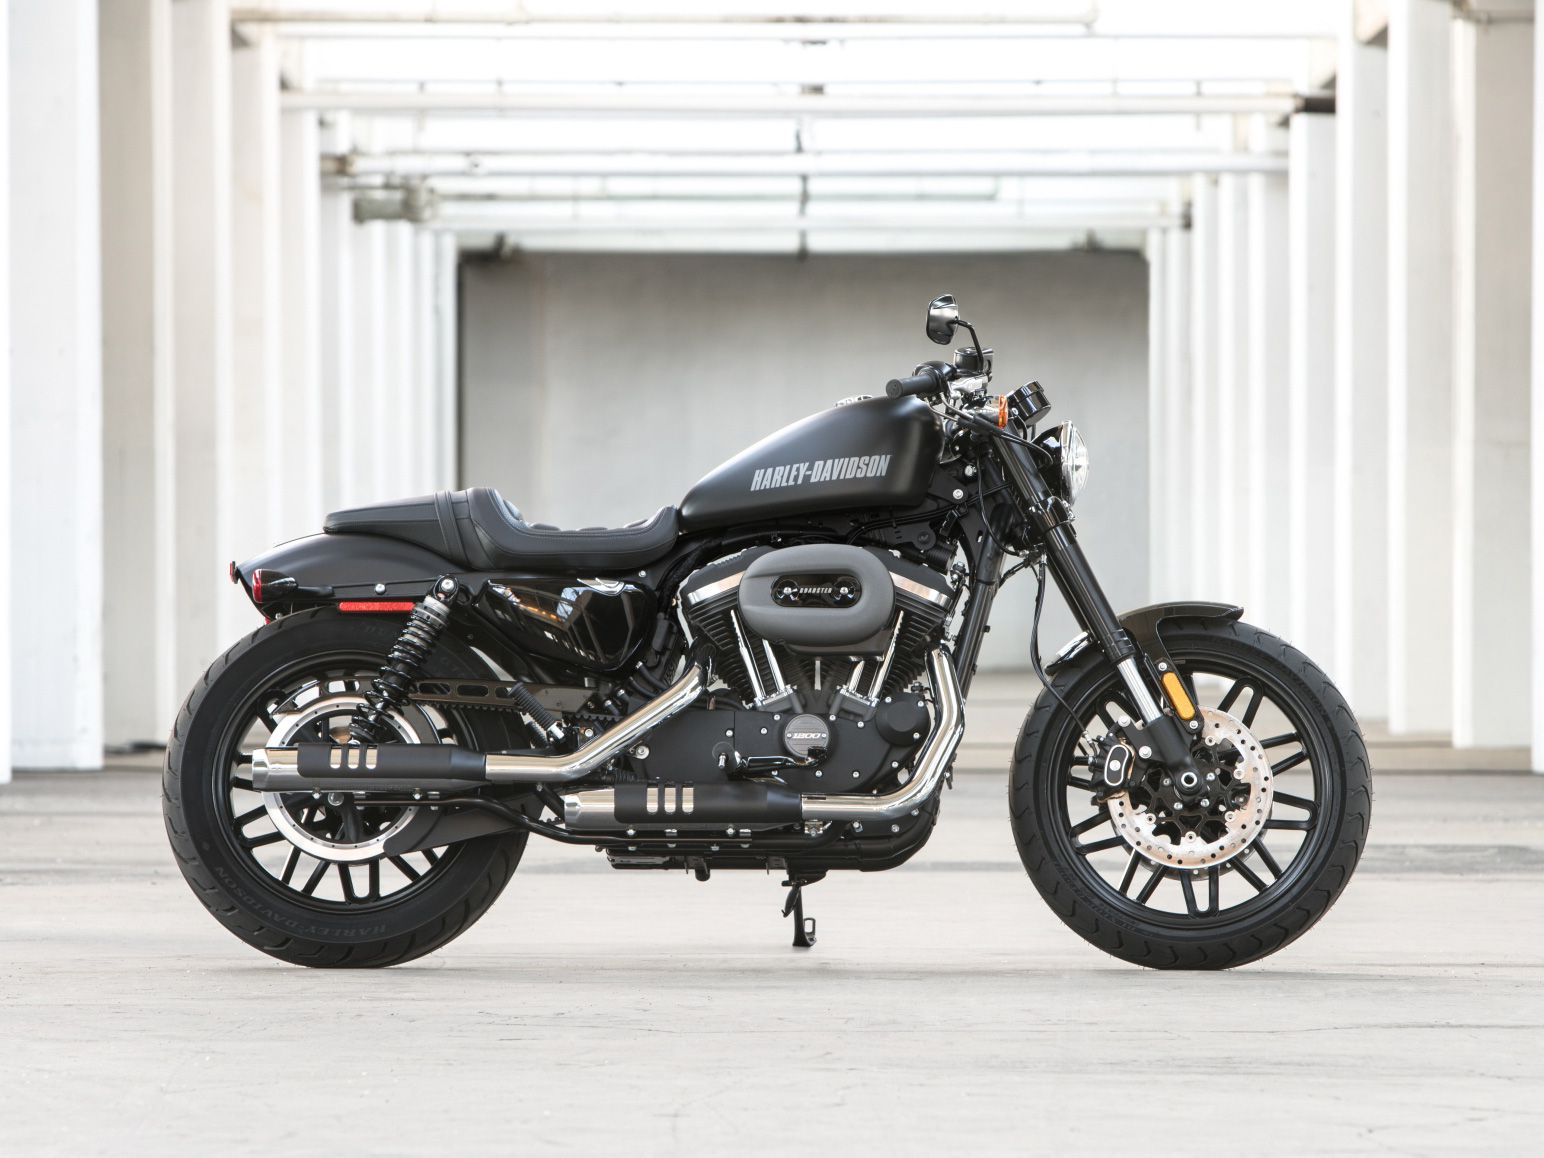 2016 Harley Davidson Roadster Cruiser First Look Review Cycle World